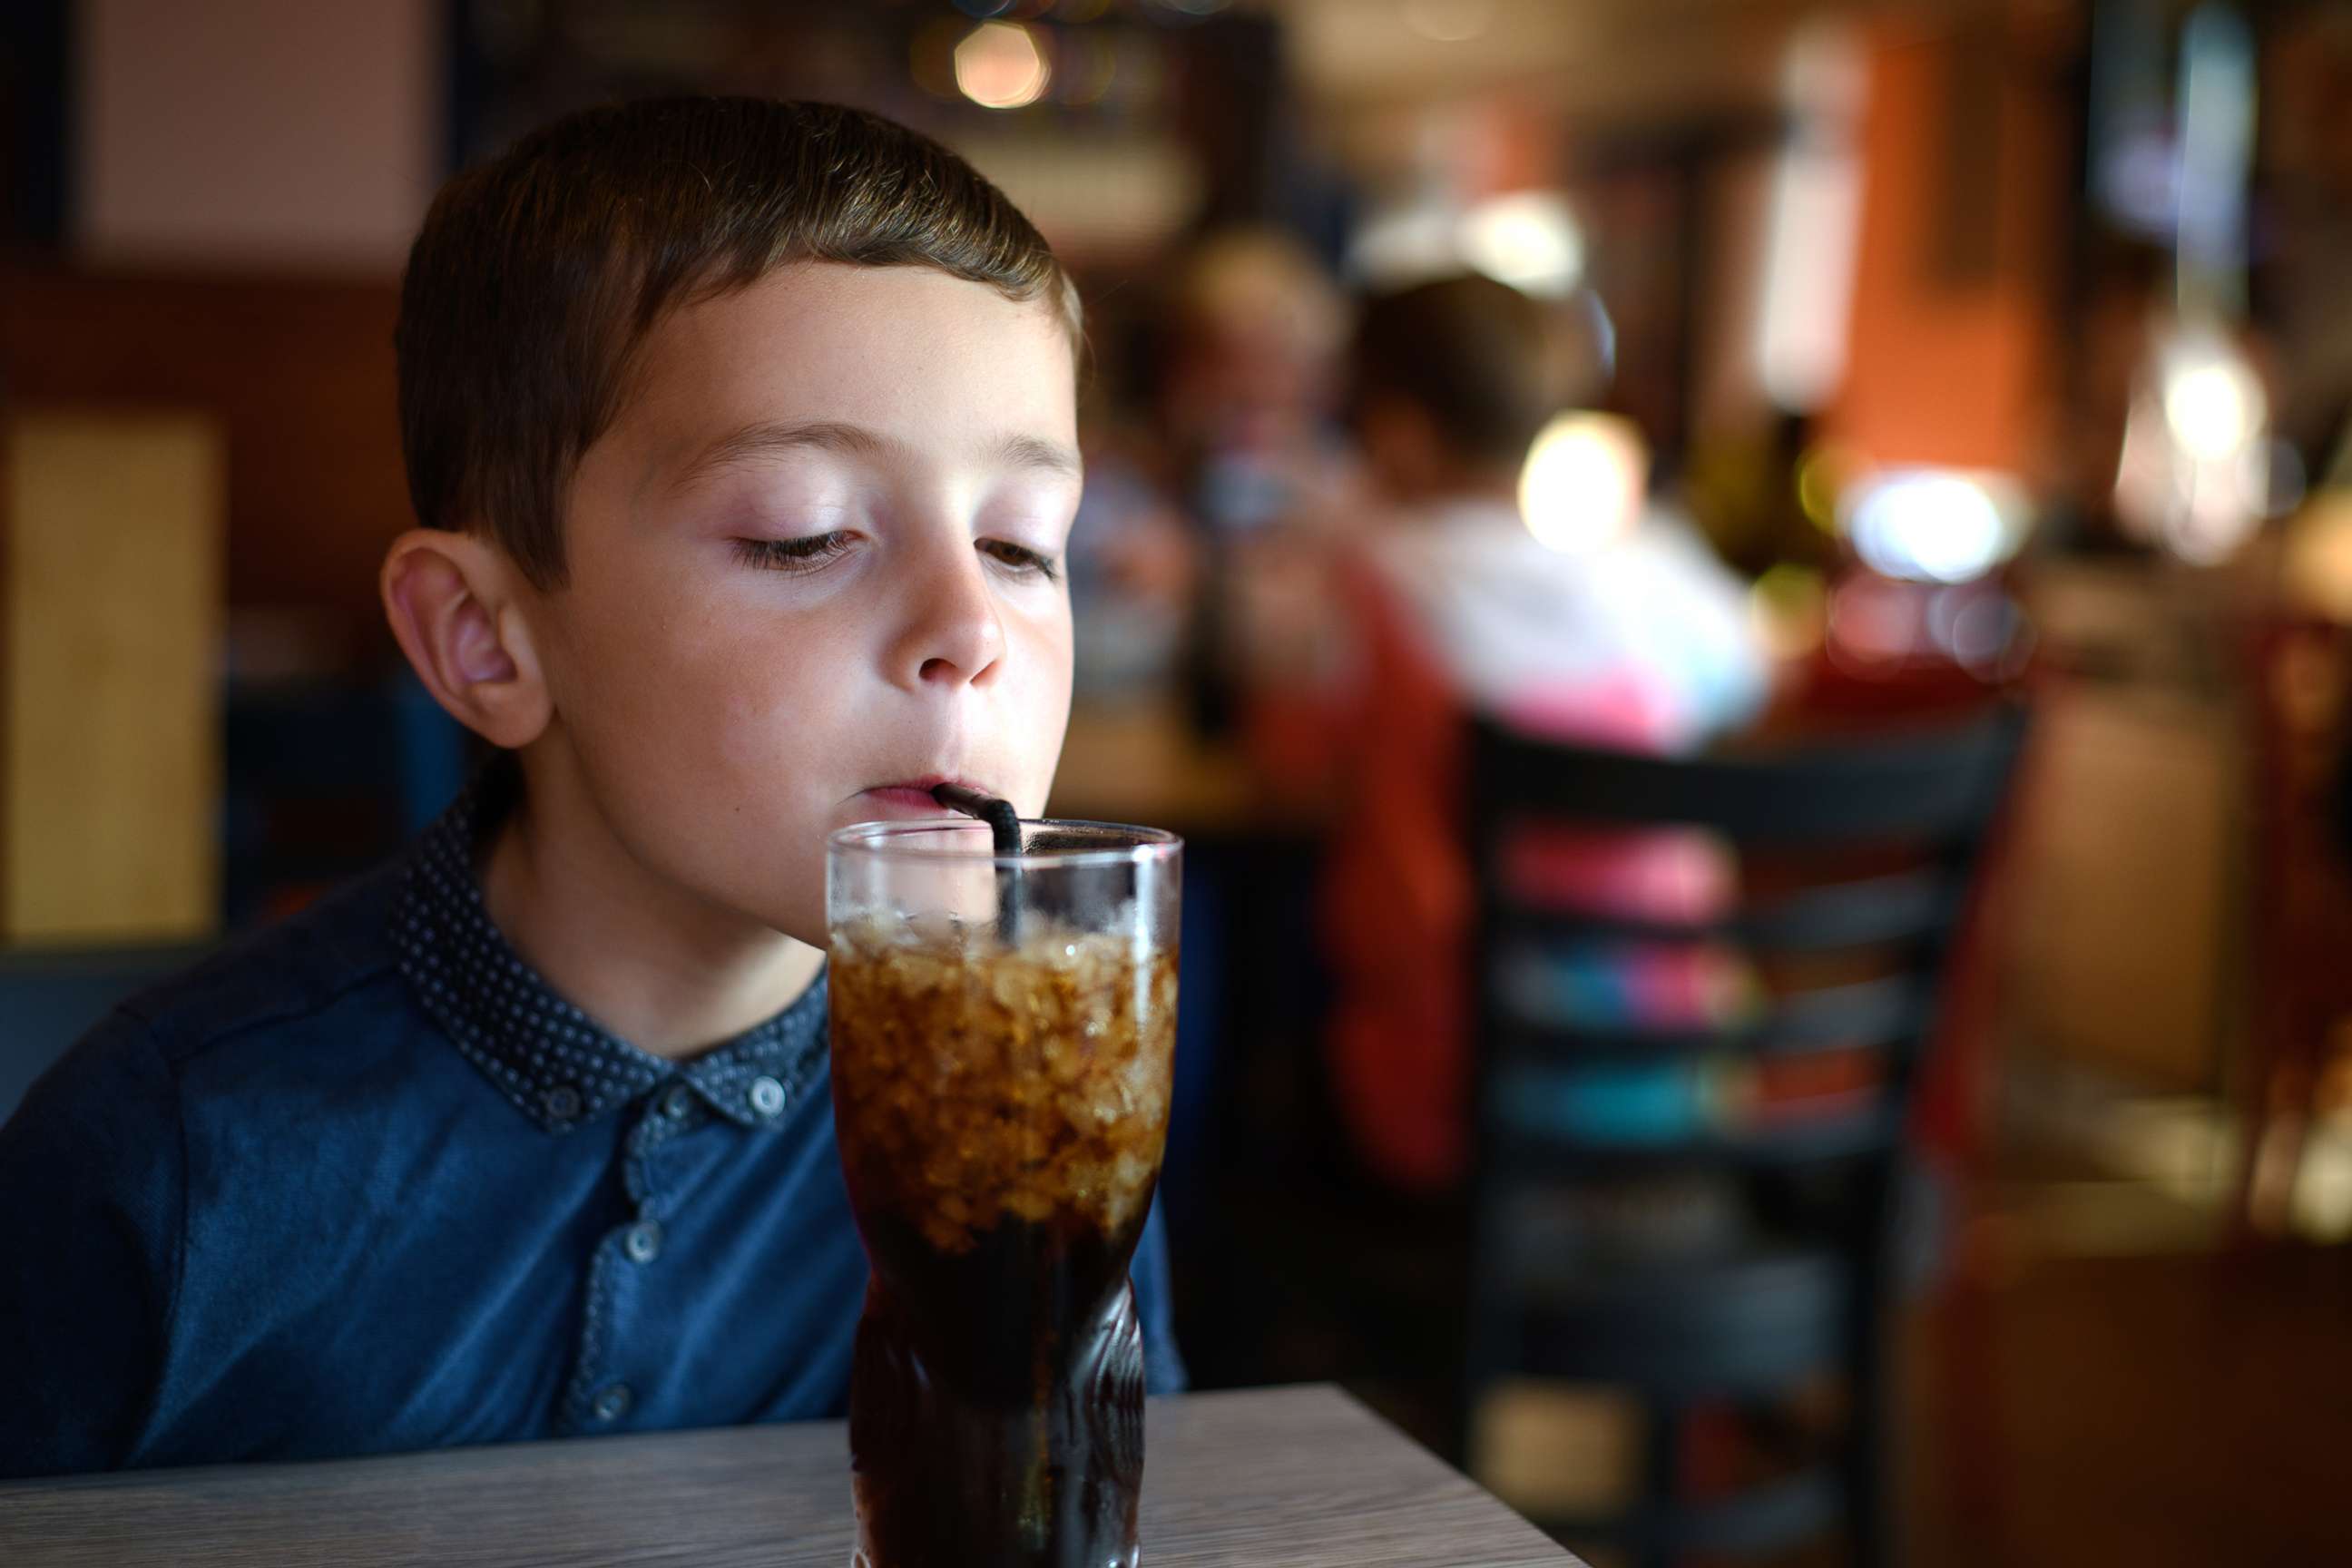 PHOTO: A child drinks from a straw in this undated stock photo.